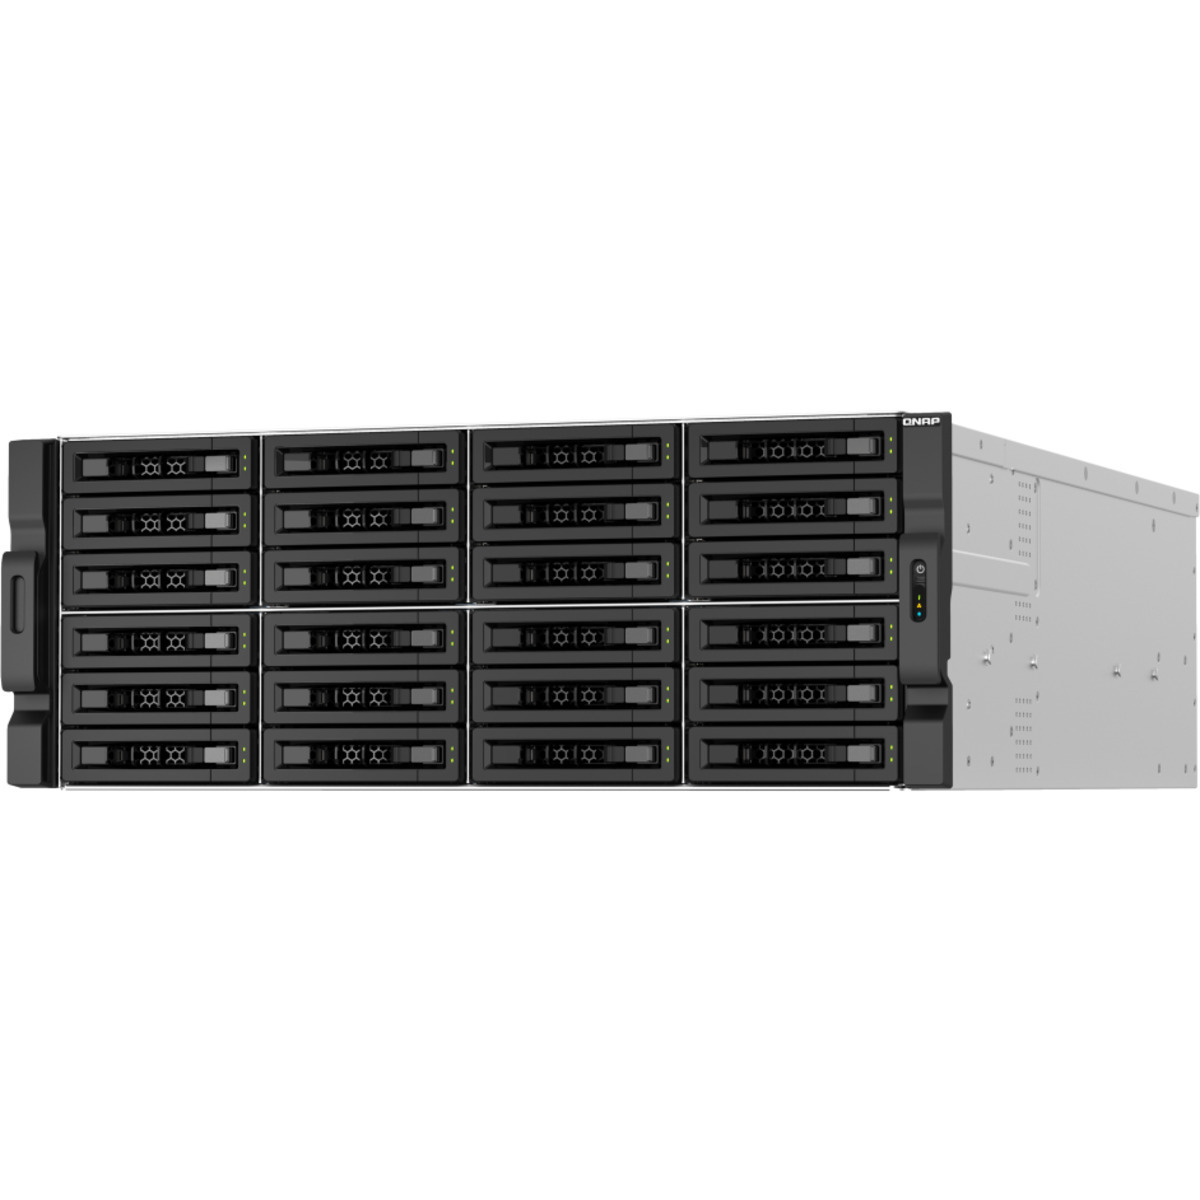 buy $21023 QNAP TS-h3087XU-RP E-2378 QuTS hero Edition 192tb RackMount NAS - Network Attached Storage Device 24x8000gb Samsung 870 QVO MZ-77Q8T0 2.5 560/530MB/s SATA 6Gb/s SSD CONSUMER Class Drives Installed - Burn-In Tested - ON SALE - nas headquarters buy network attached storage server device das new raid-5 free shipping simply usa TS-h3087XU-RP E-2378 QuTS hero Edition